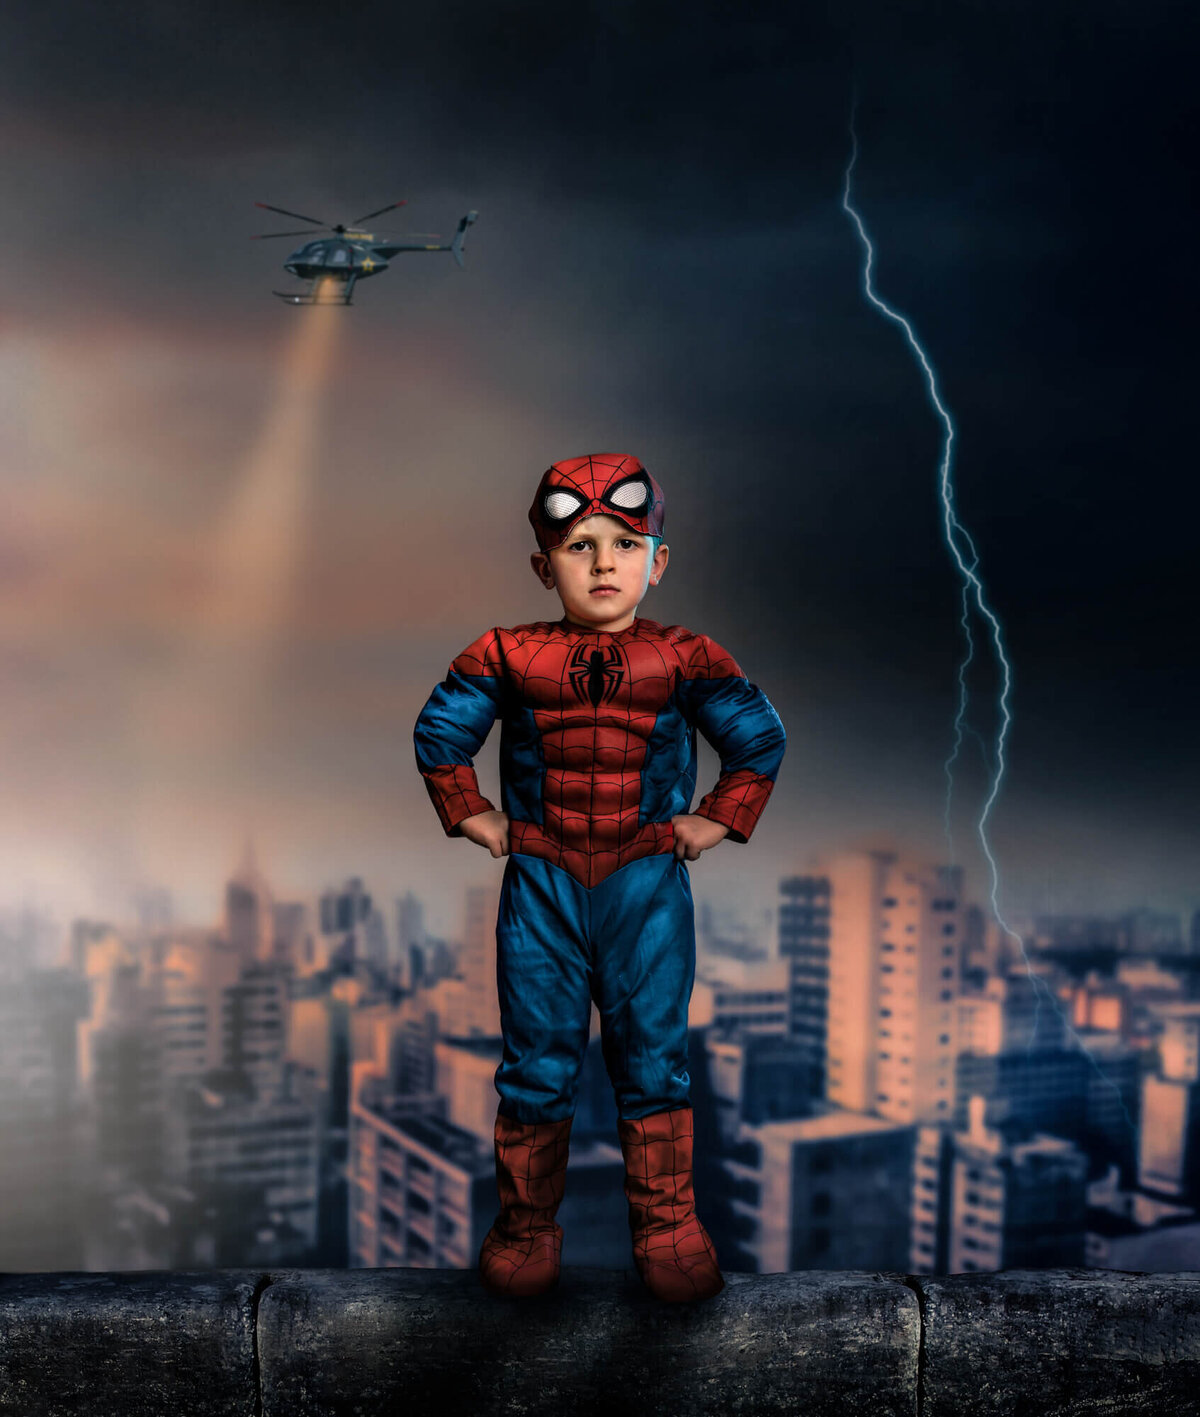 A young boy stands on a building ledge dressed as SpiderMan while lightening strikes behind him